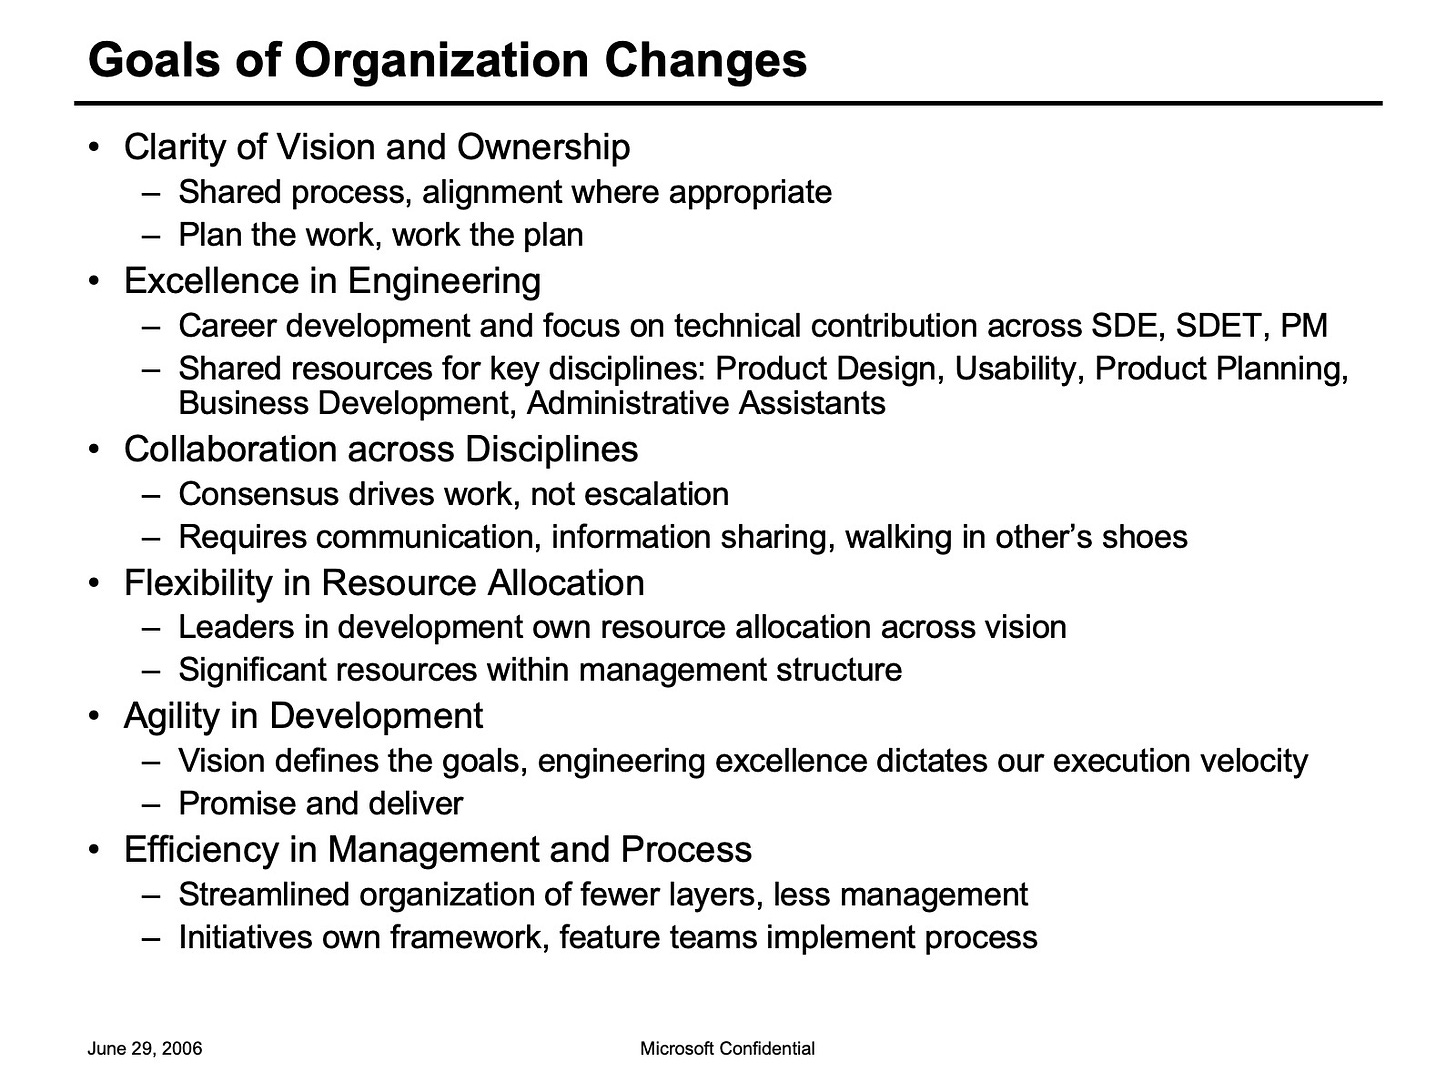 Goals of Organization Changes Clarity of Vision and Ownership Shared process, alignment where appropriate Plan the work, work the plan Excellence in Engineering Career development and focus on technical contribution across SDE. SDET. PM Shared resources for key disciplines: Product Design, Usability, Product Planning, Business Development, Administrative Assistants Collaboration across Disciplines Consensus drives work, not escalation Requires communication, information sharing, walking in other's shoes Flexibility in Resource Allocation Leaders in development own resource allocation across vision Significant resources within management structure Agility in Development Vision defines the goals, engineering excellence dictates our execution velocity Promise and deliver Efficiency in Management and Process Streamlined organization of fewer layers, less management Initiatives own framework, feature teams implement process